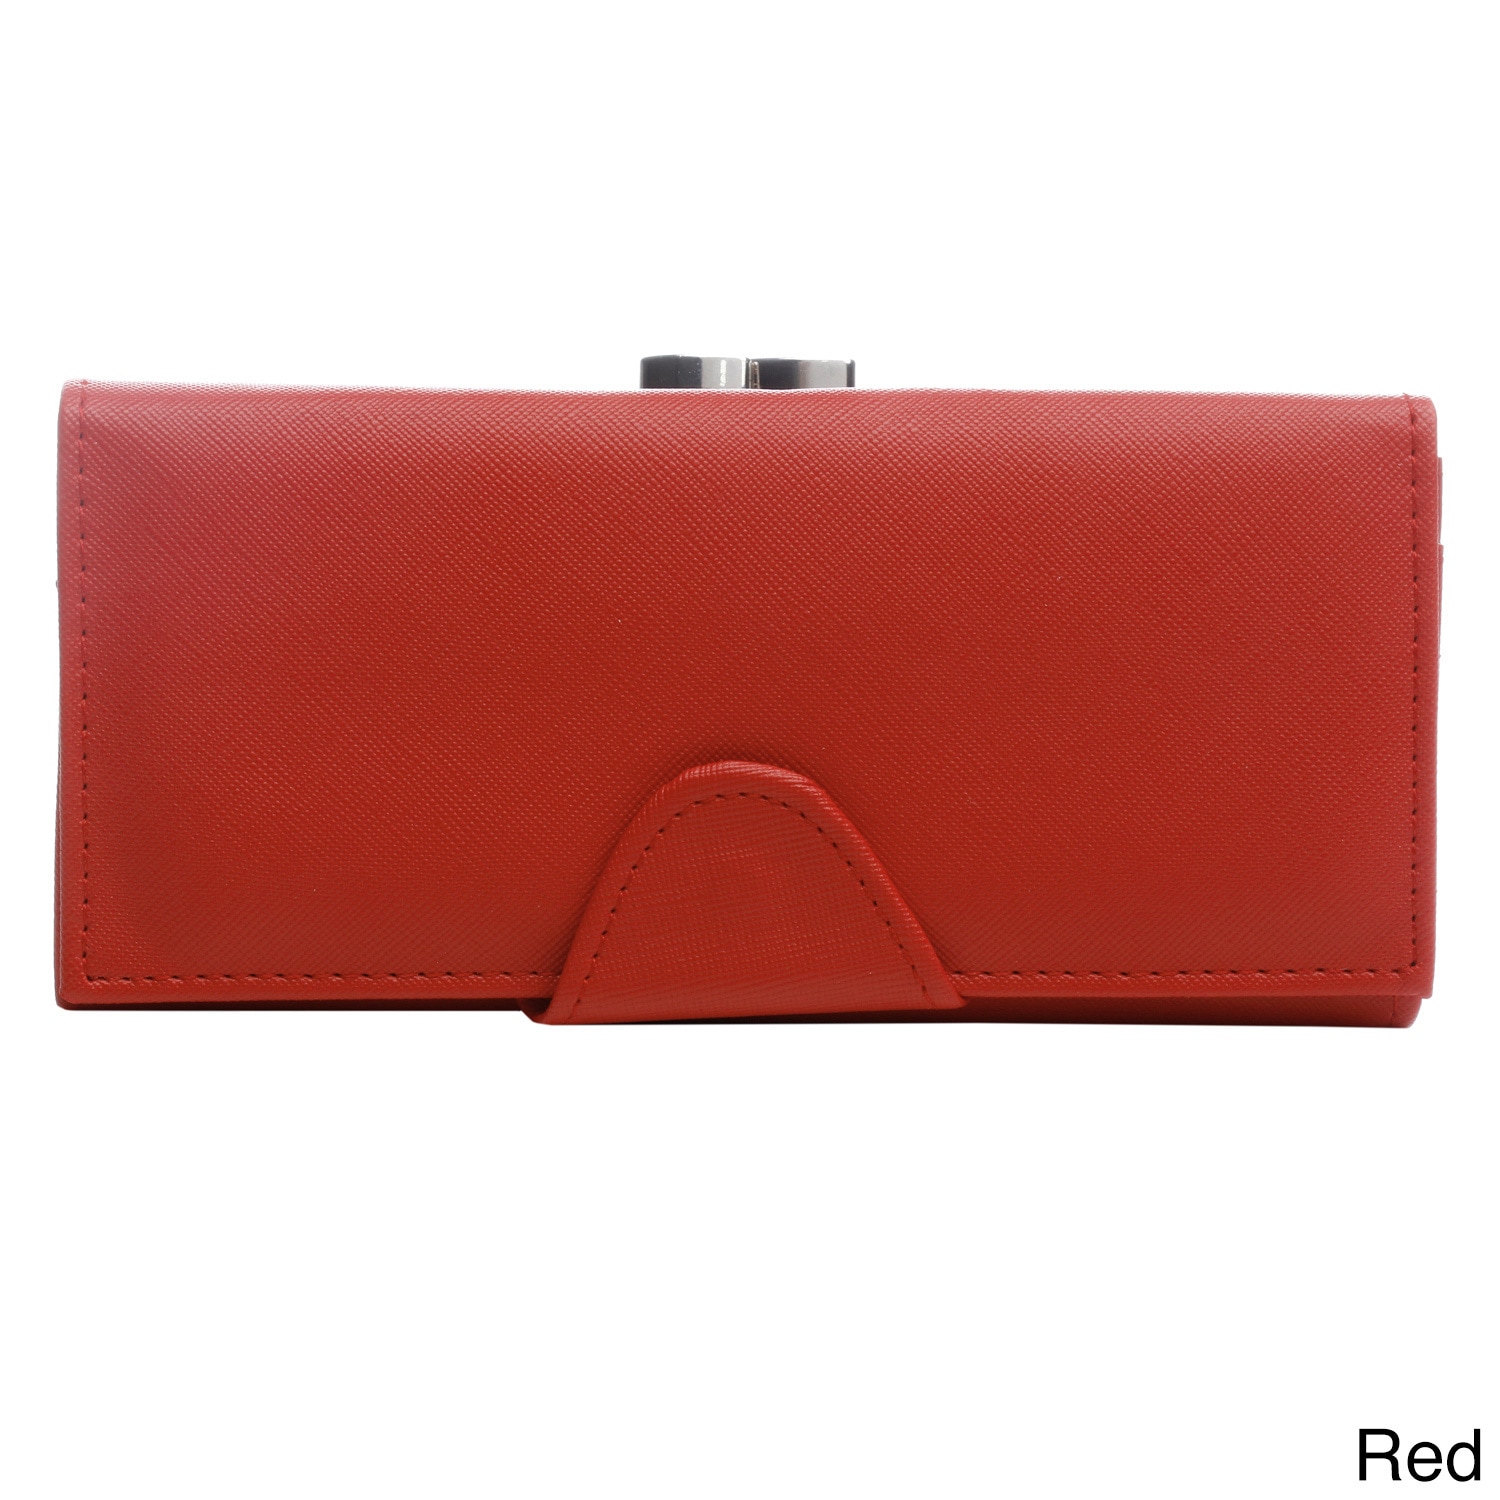 J. Furmani Solid Accordion style Structured Wallet